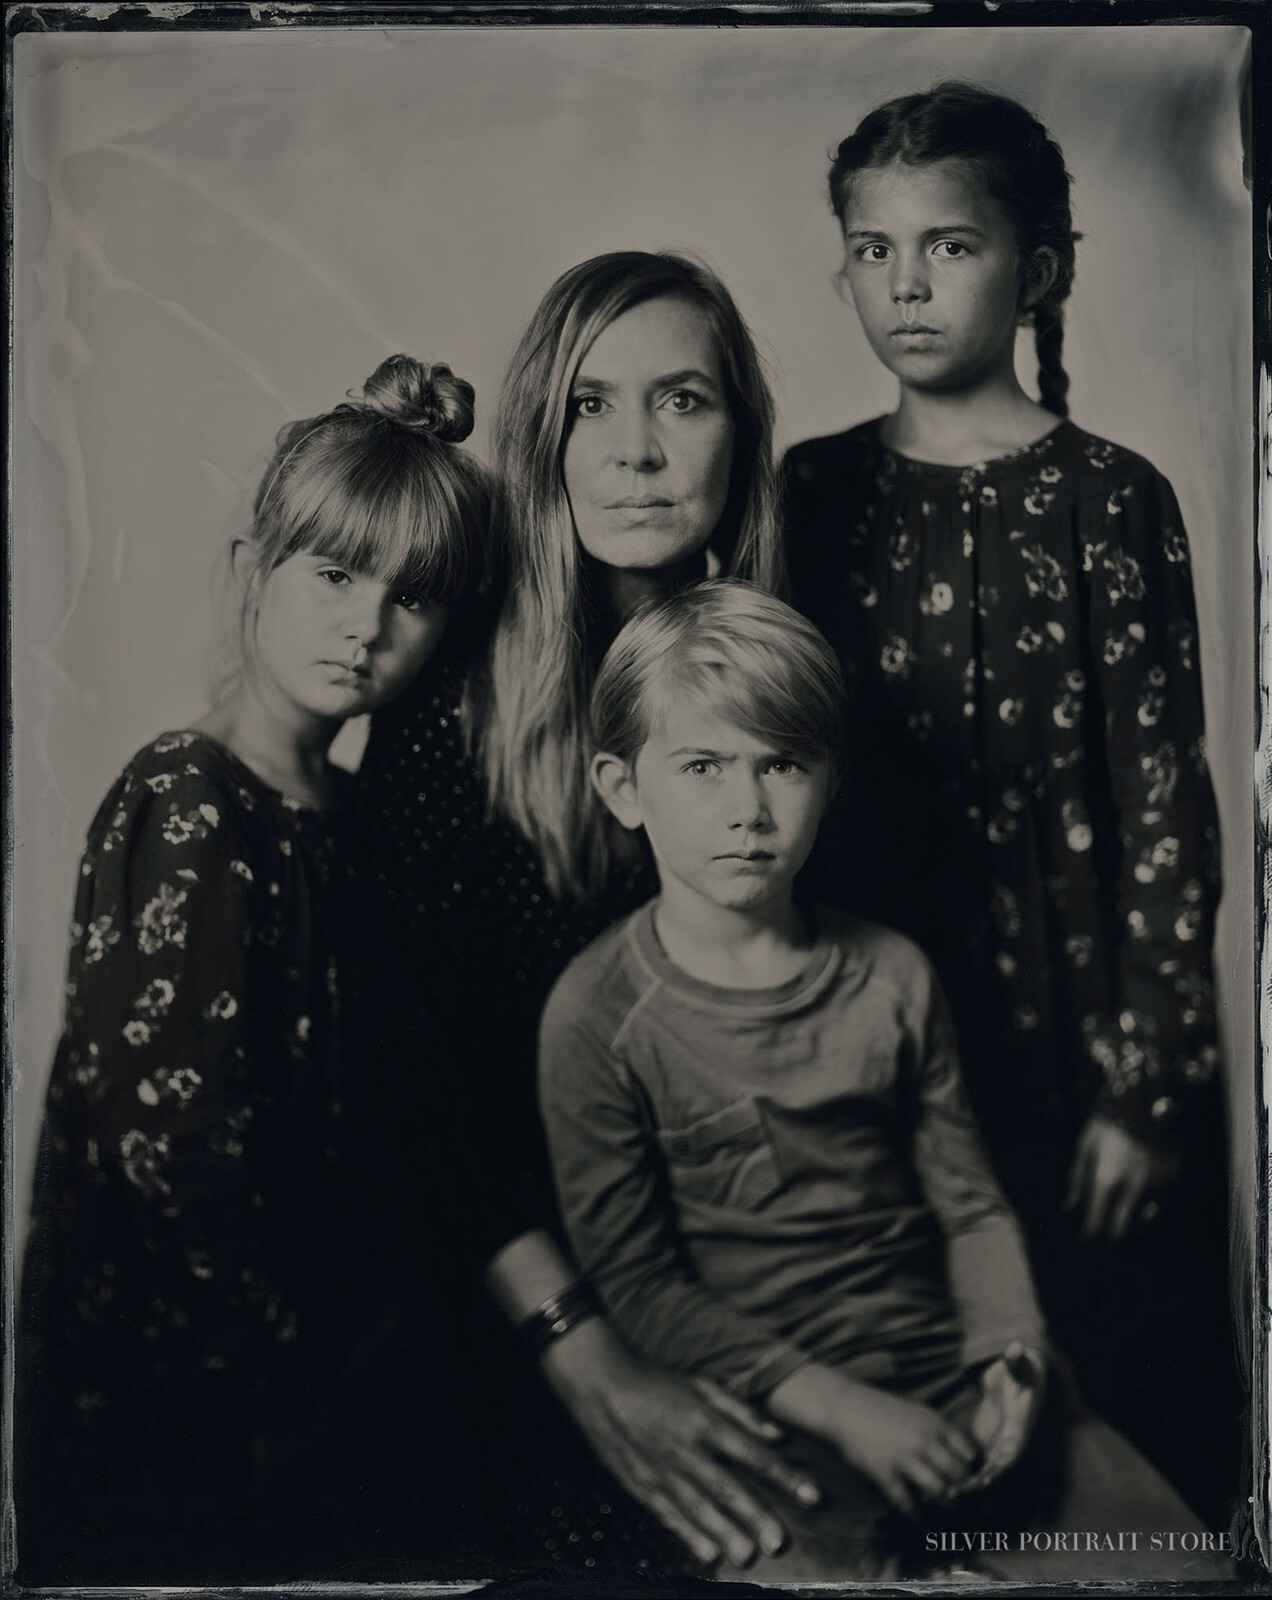 Badass Family-Silver Portrait Store-Scan from Wet plate collodion-Tintype 20 x 25 cm